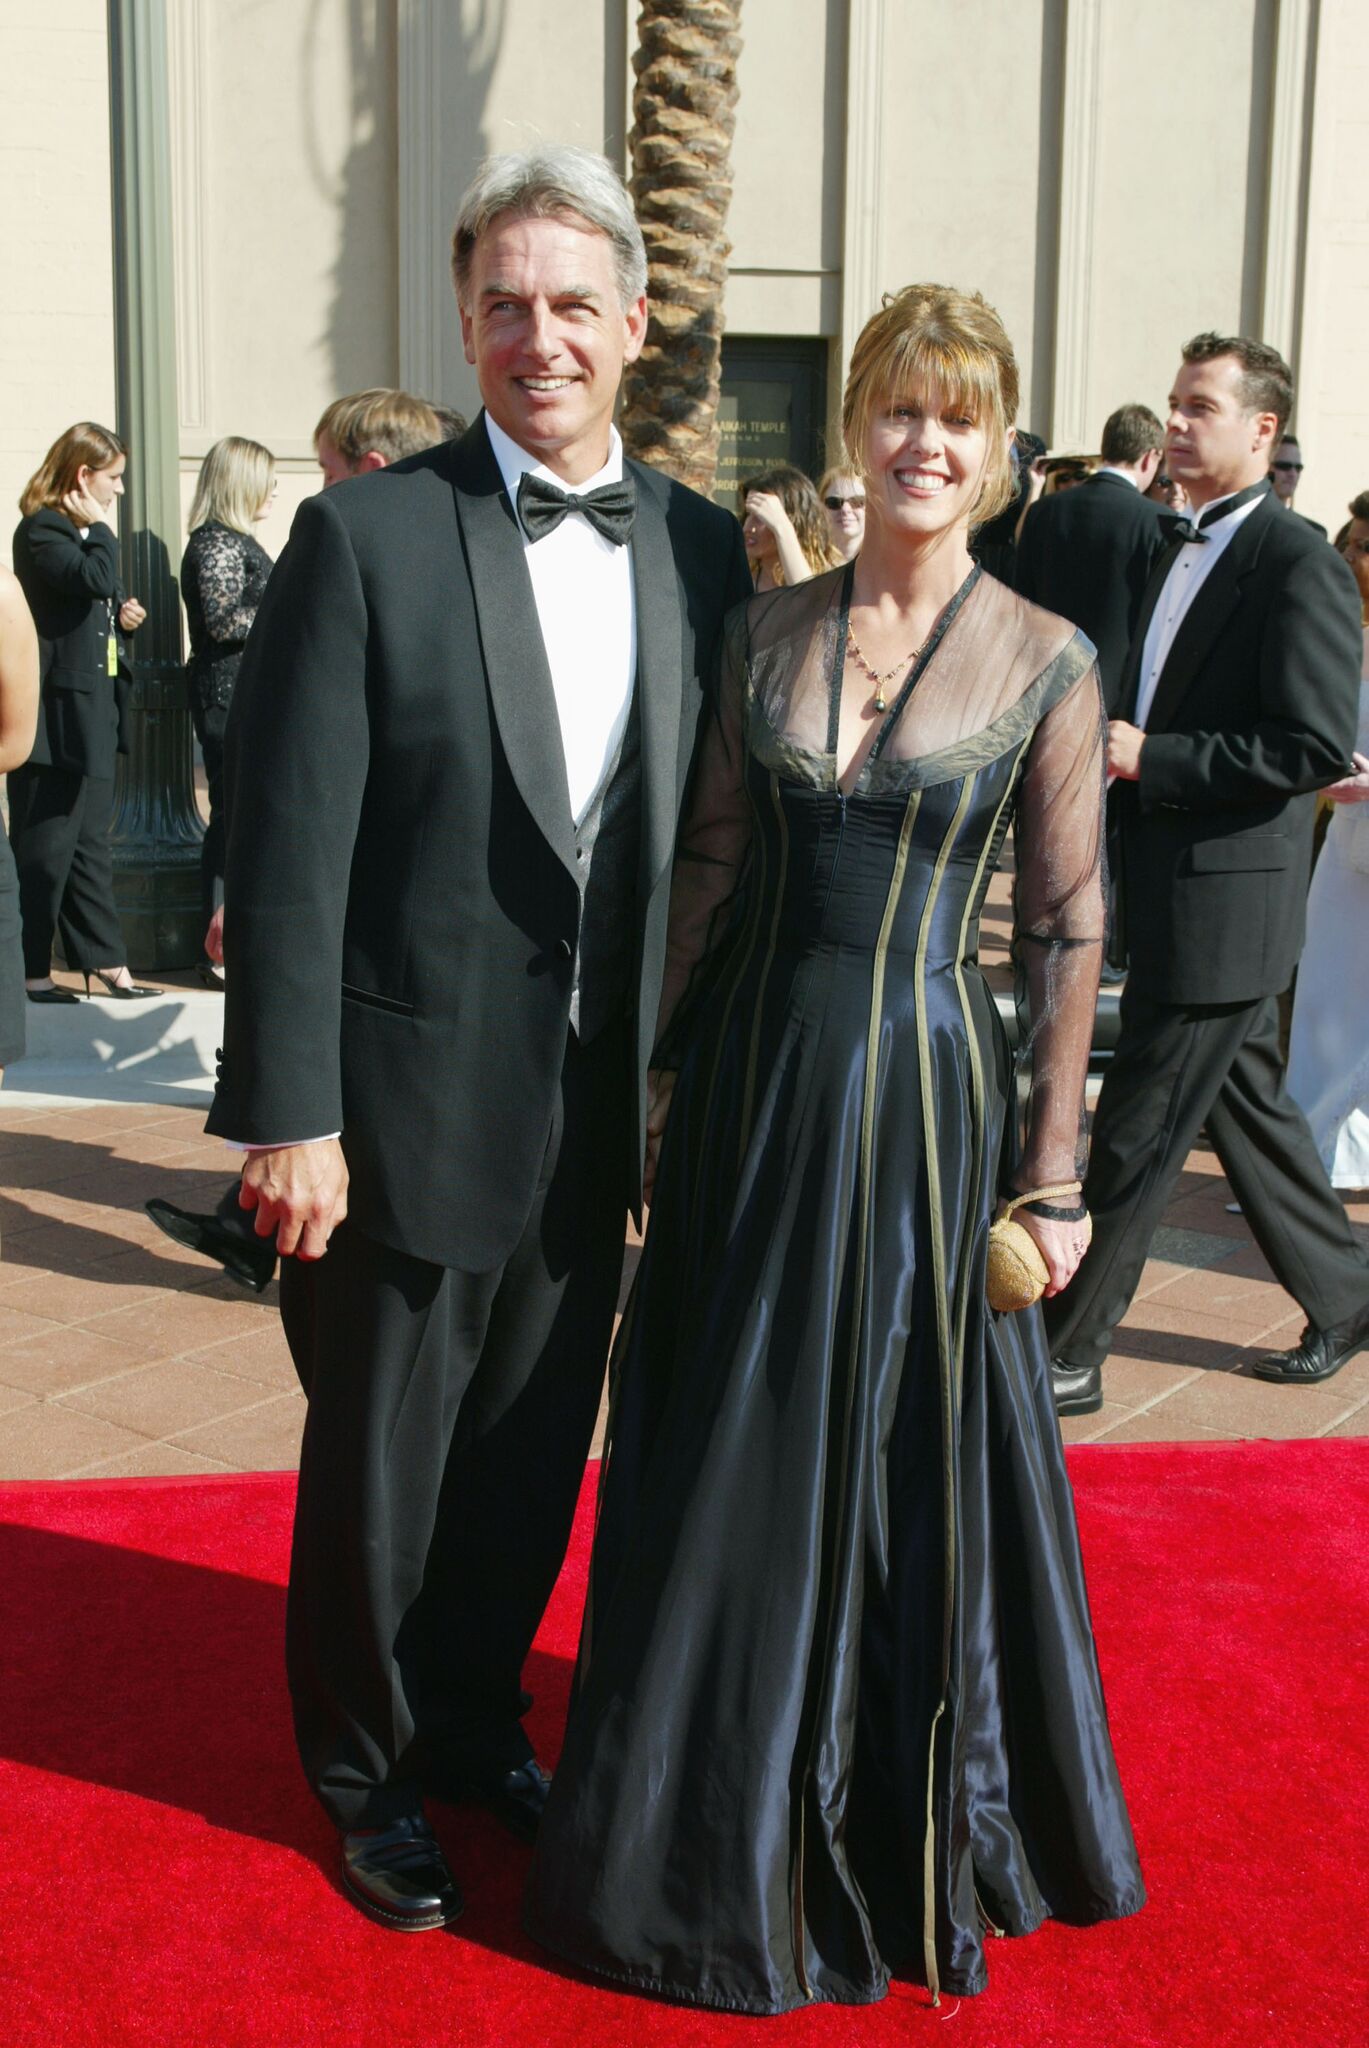 Mark Harmon and Pam Dawber at the 2002 Creative Arts Emmy Awards at the Shrine Auditorium. | Photo: Getty Images